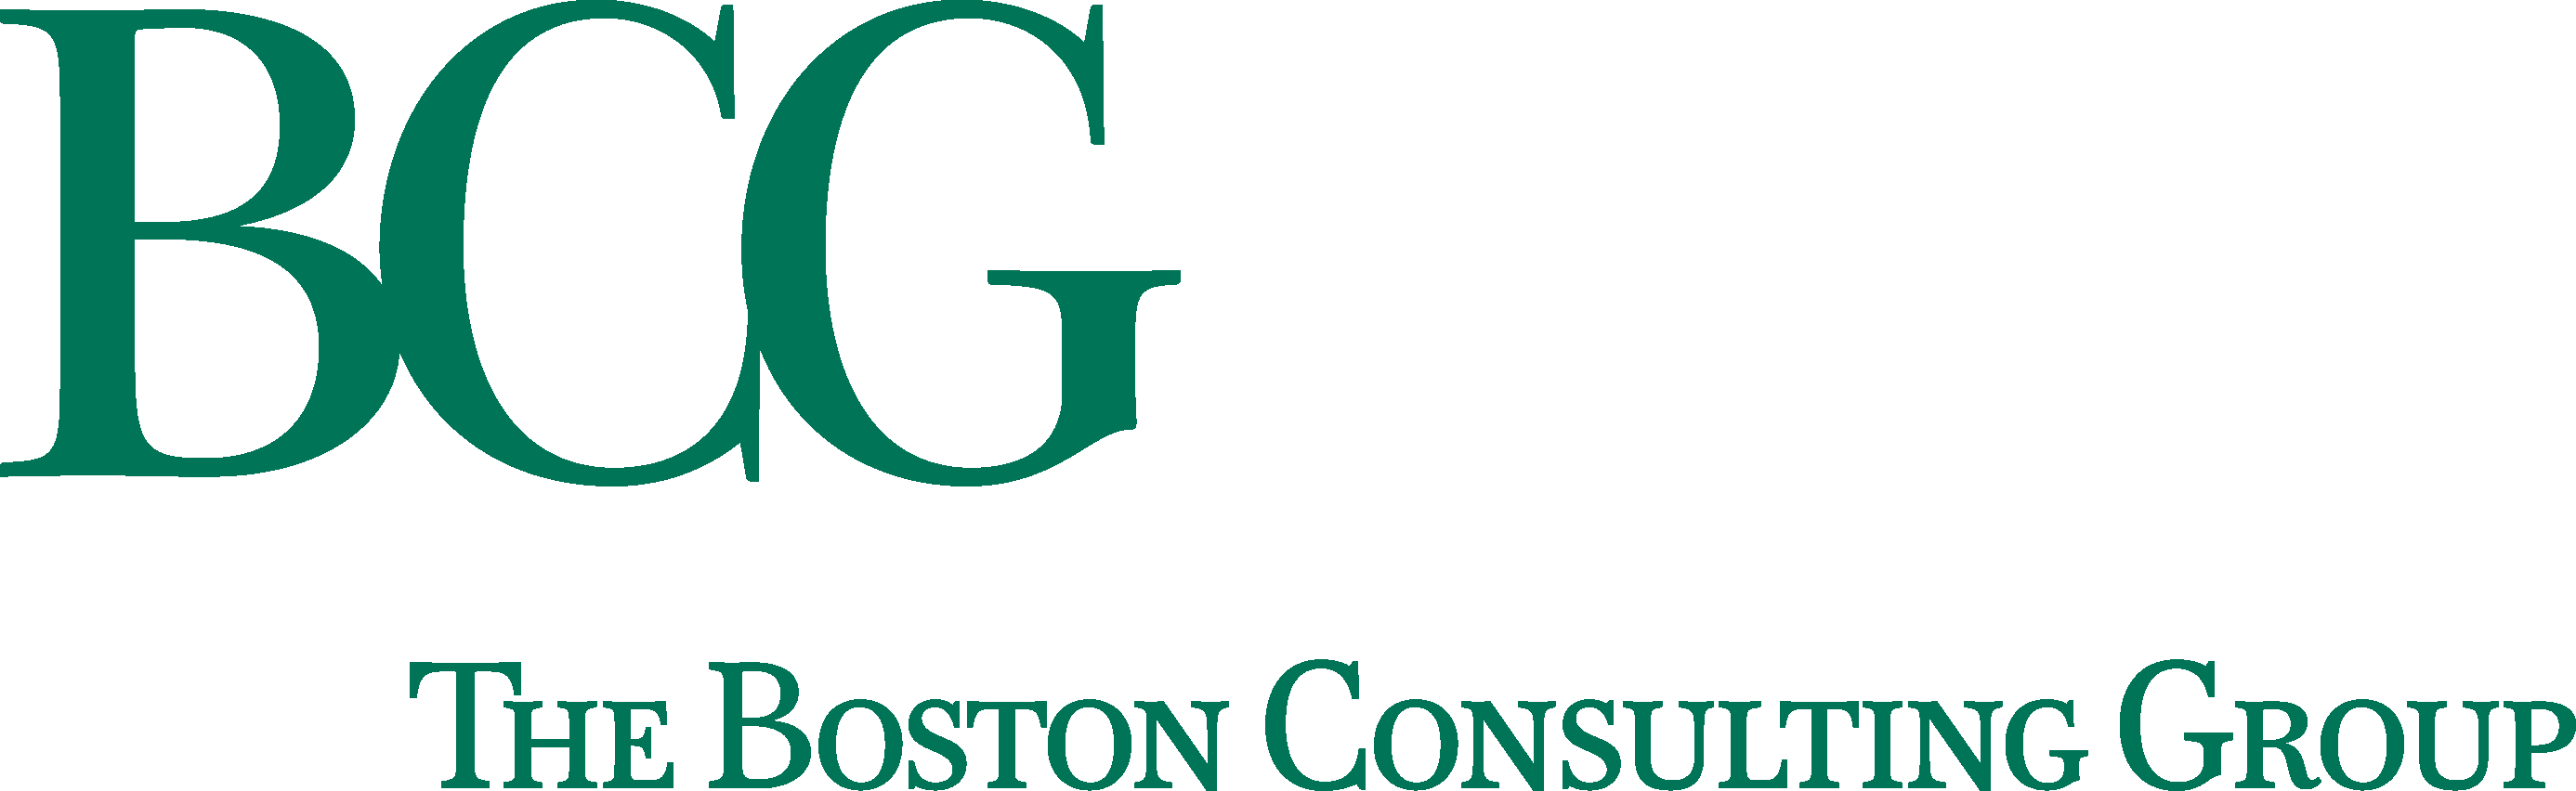 The Boston Consulting Group (BCG) Logo png